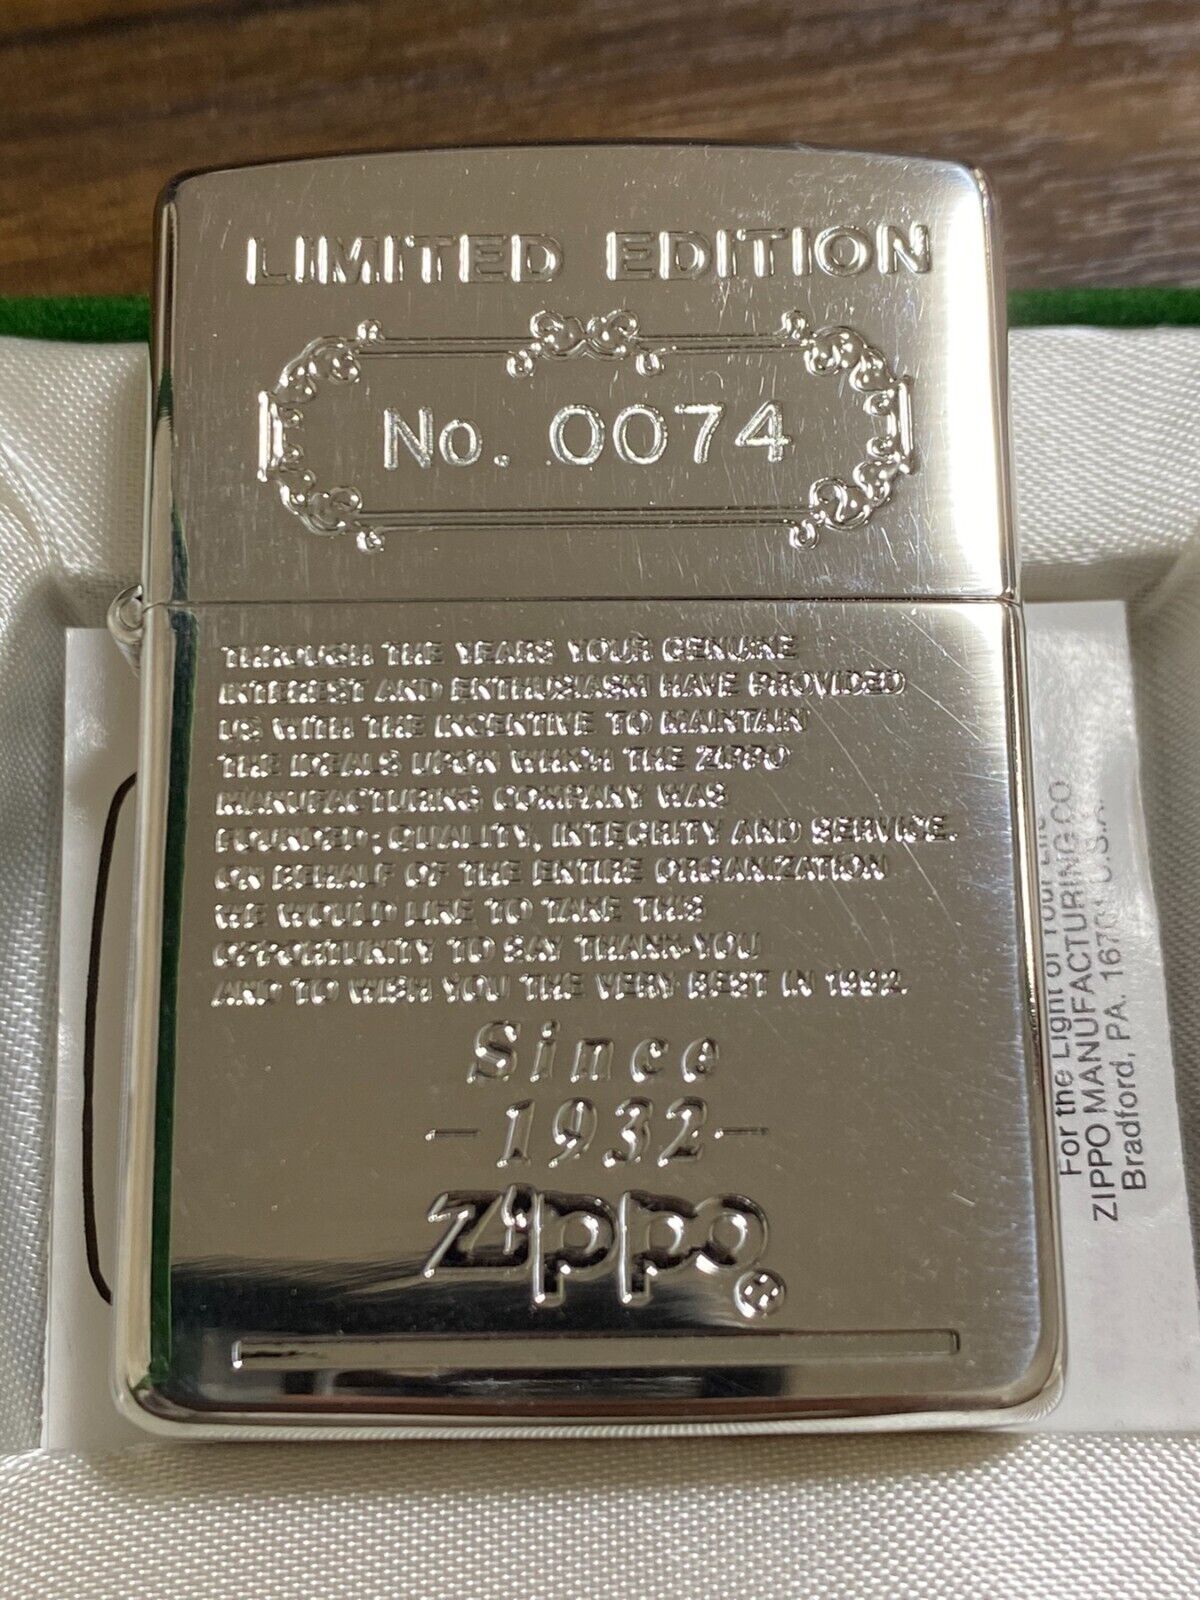 Vintage 1991 Zippo Silver Oil Lighter 15 Micron Reverse Stamped Limited Edition